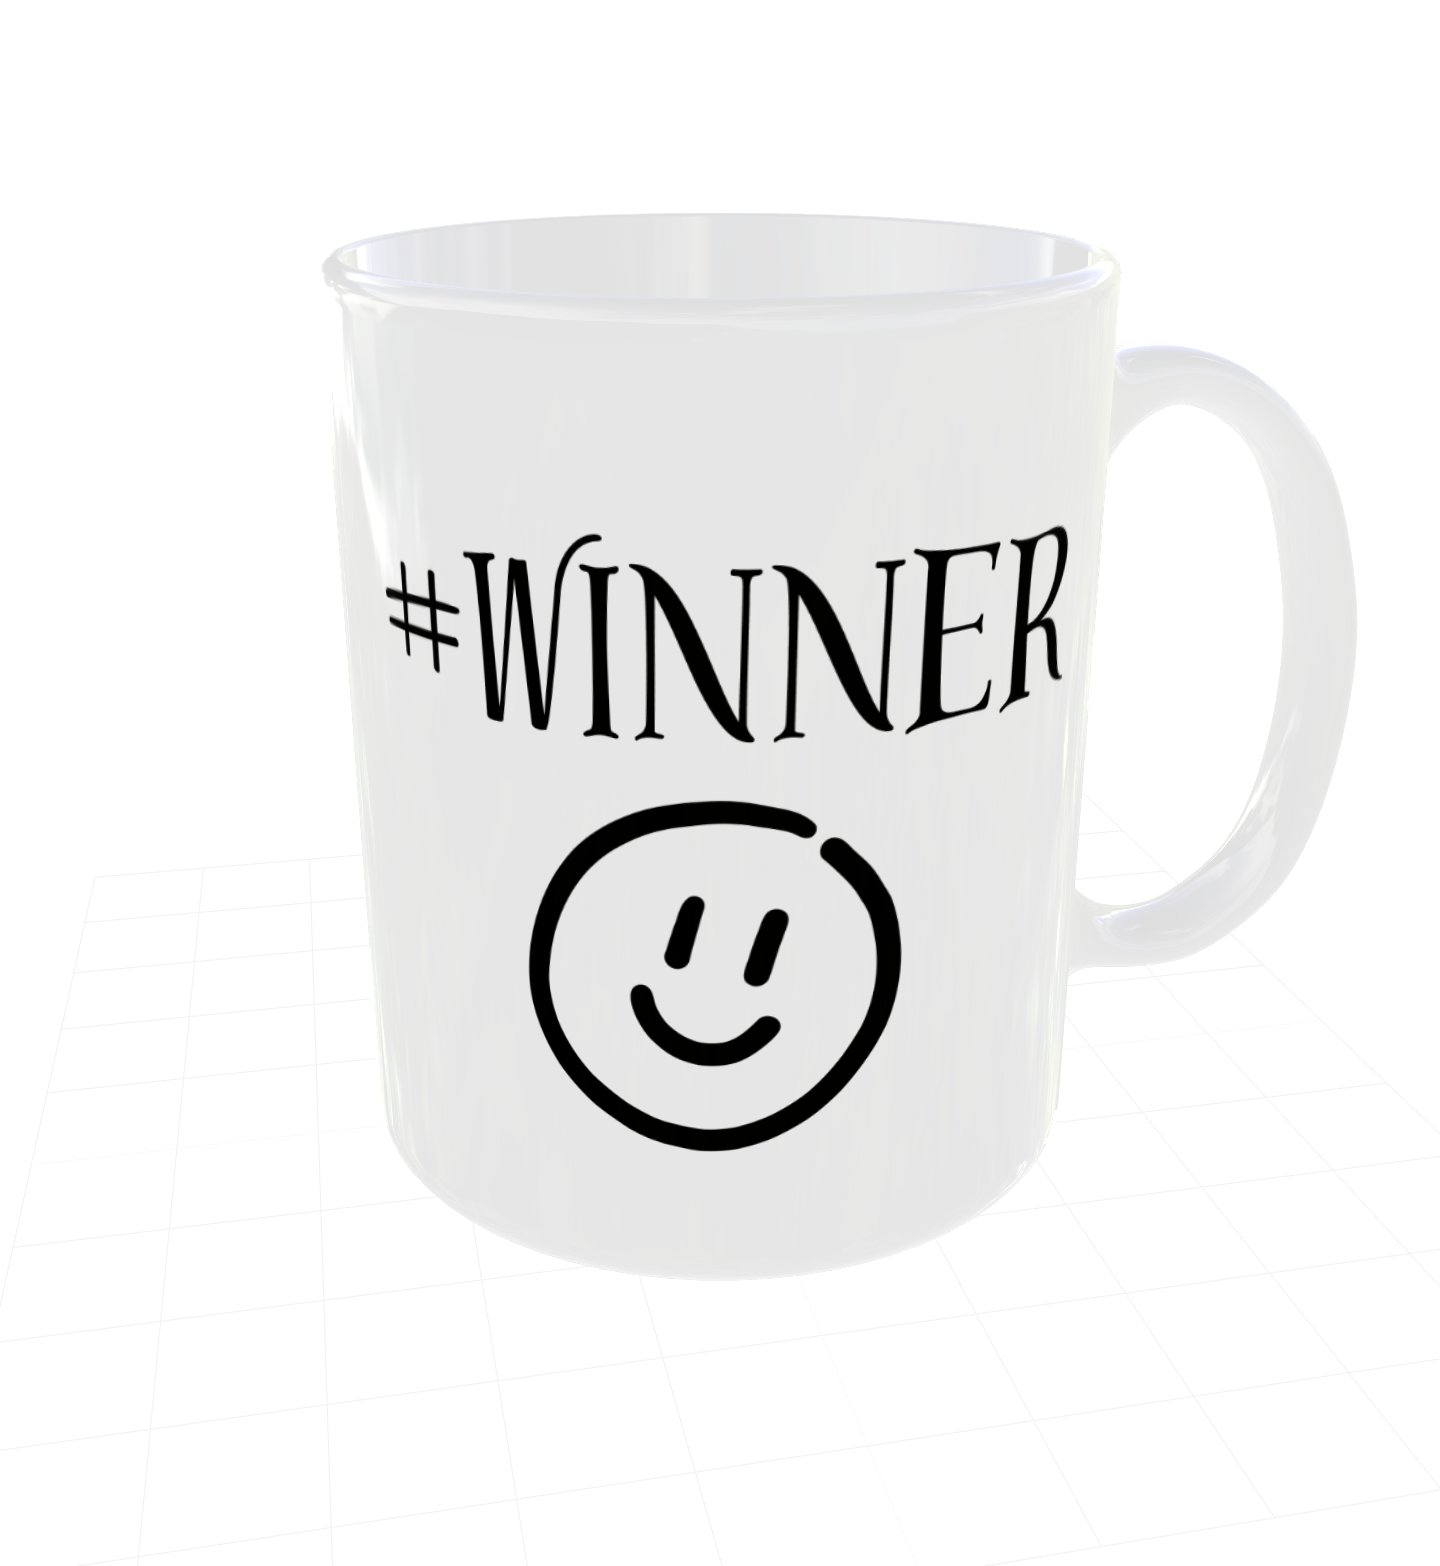 Celebration box Melbourne. Yes please! Send this winner mug and make your friends smile!